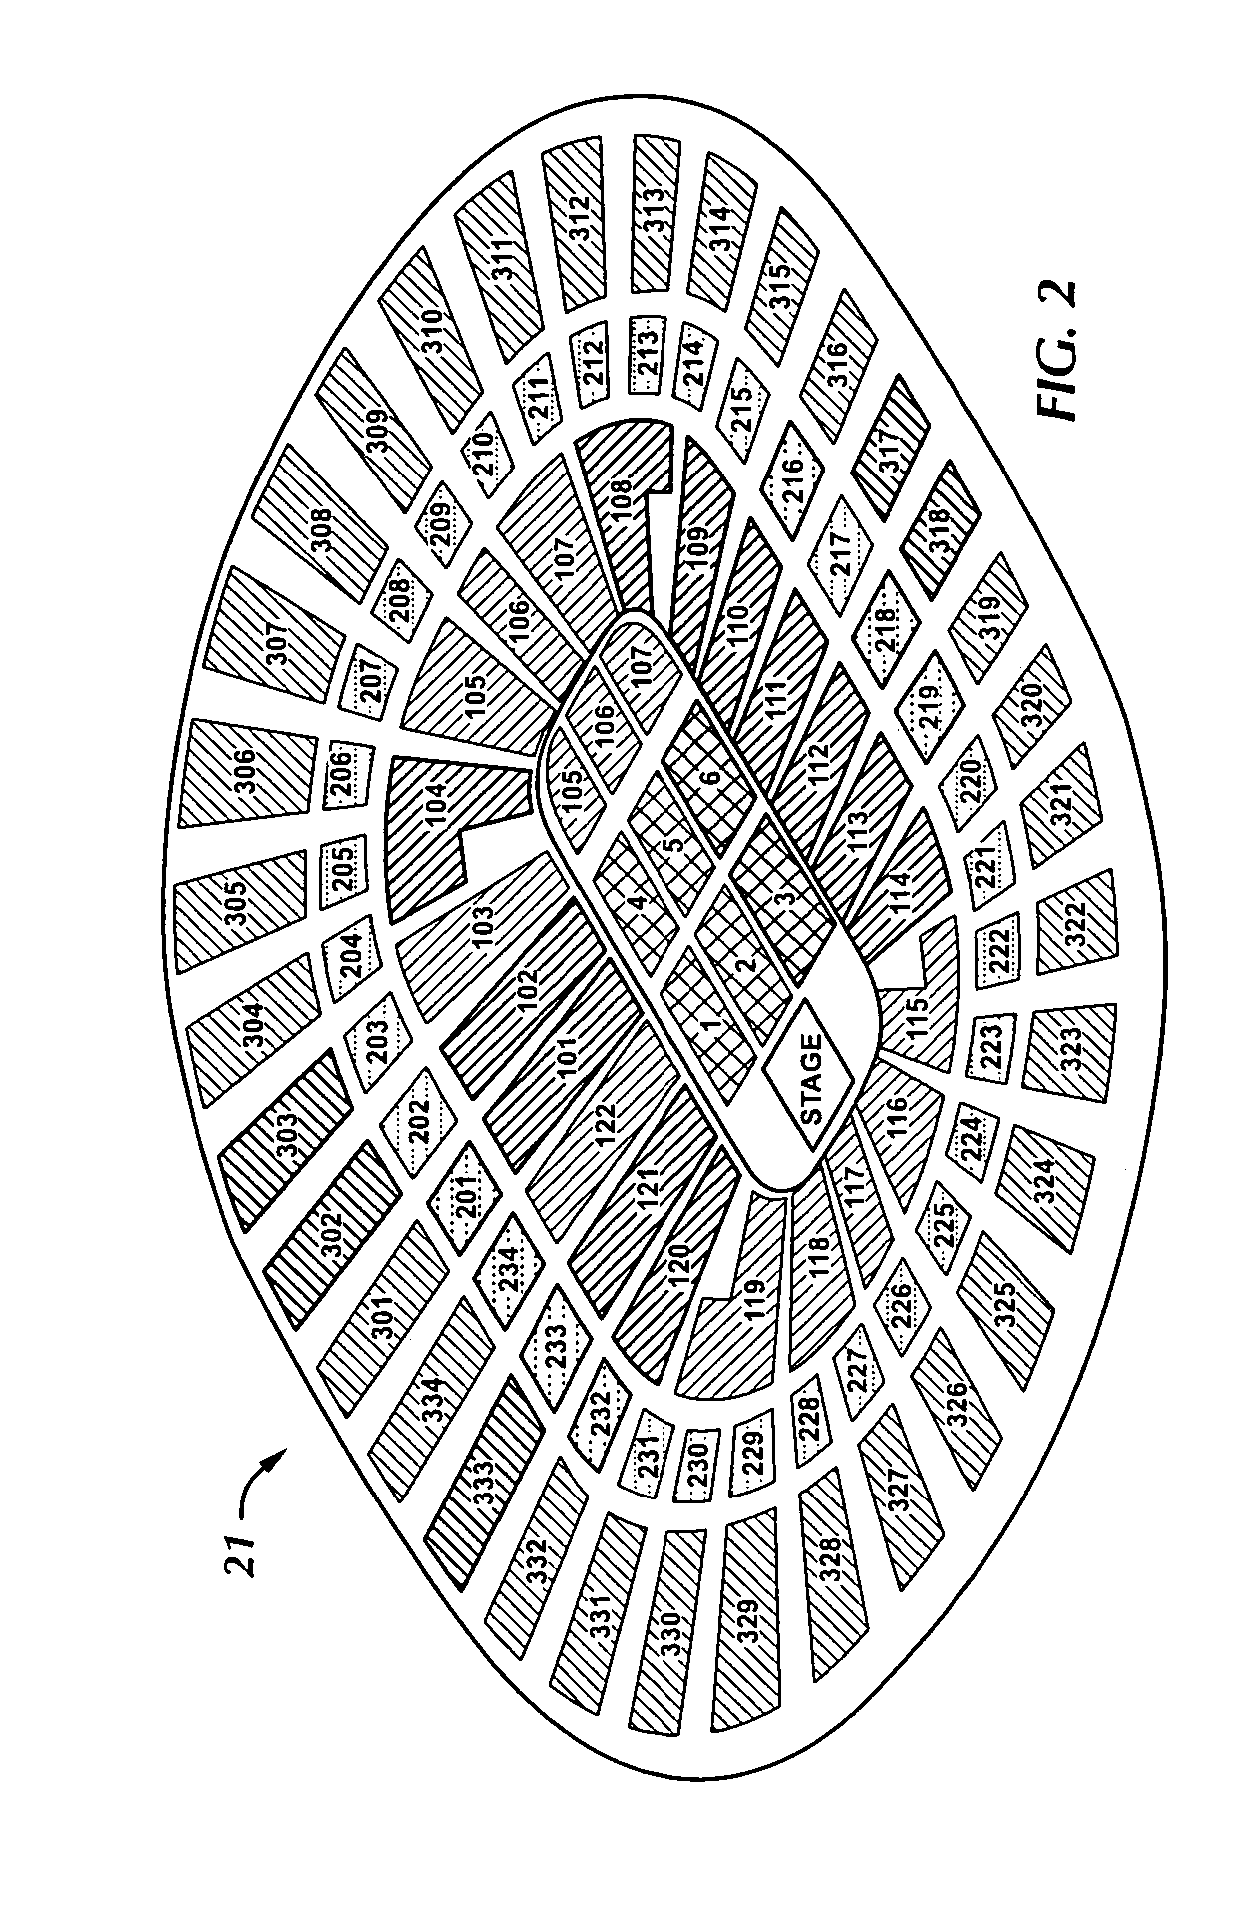 Method and system for automated ticketing for events in a venue